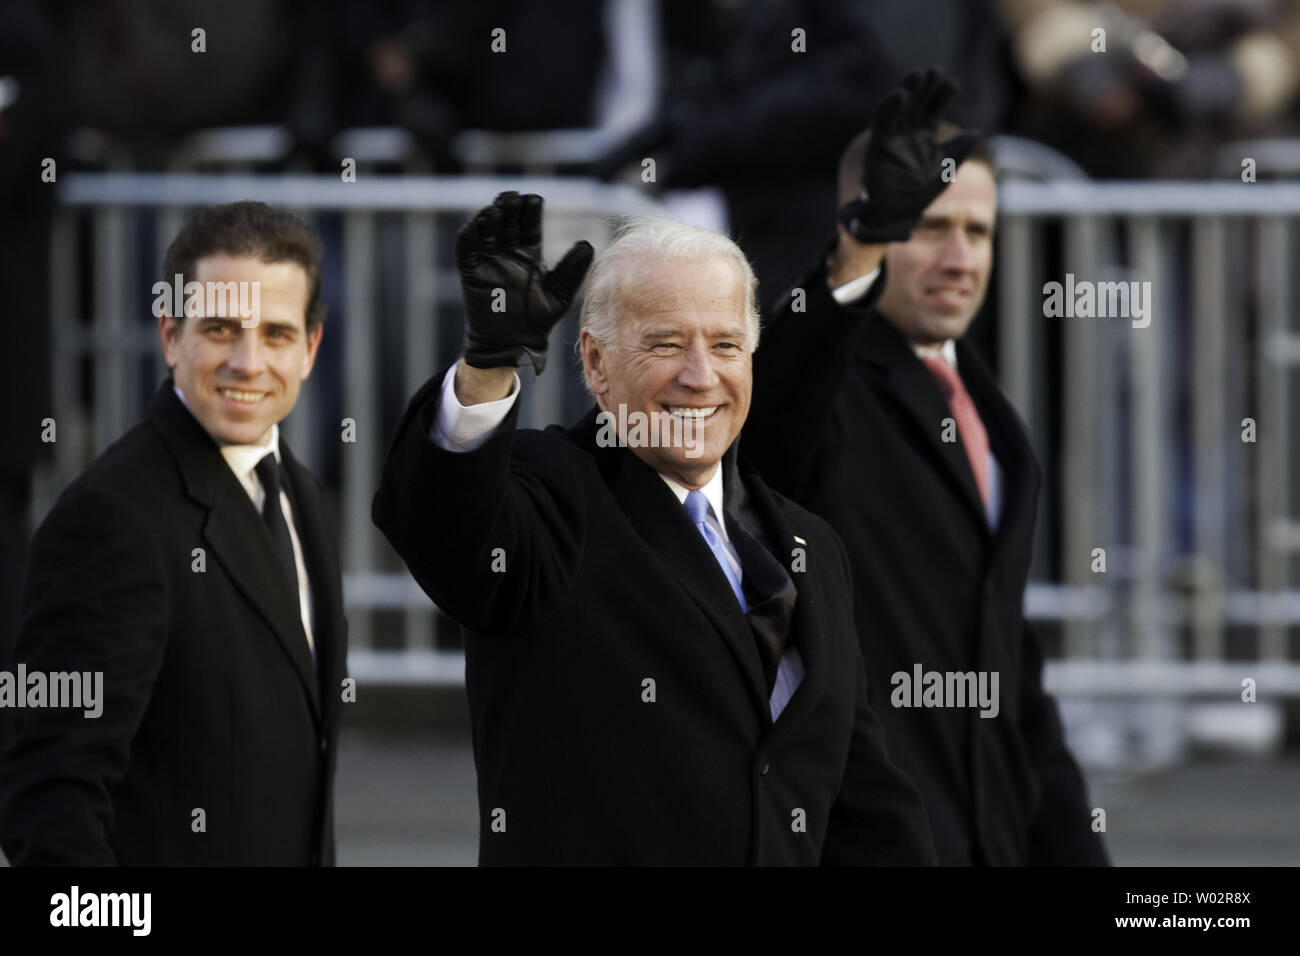 Vice President Joe Biden waves to the crowd at Freedom Plaza in Washington on January 20, 2009.  Barack Obama was sworn in as the 44th President of the United States of America at his Inauguration Ceremony on Capitol Hill earlier in the day.  (UPI Photo/Patrick D. McDermott) Stock Photo